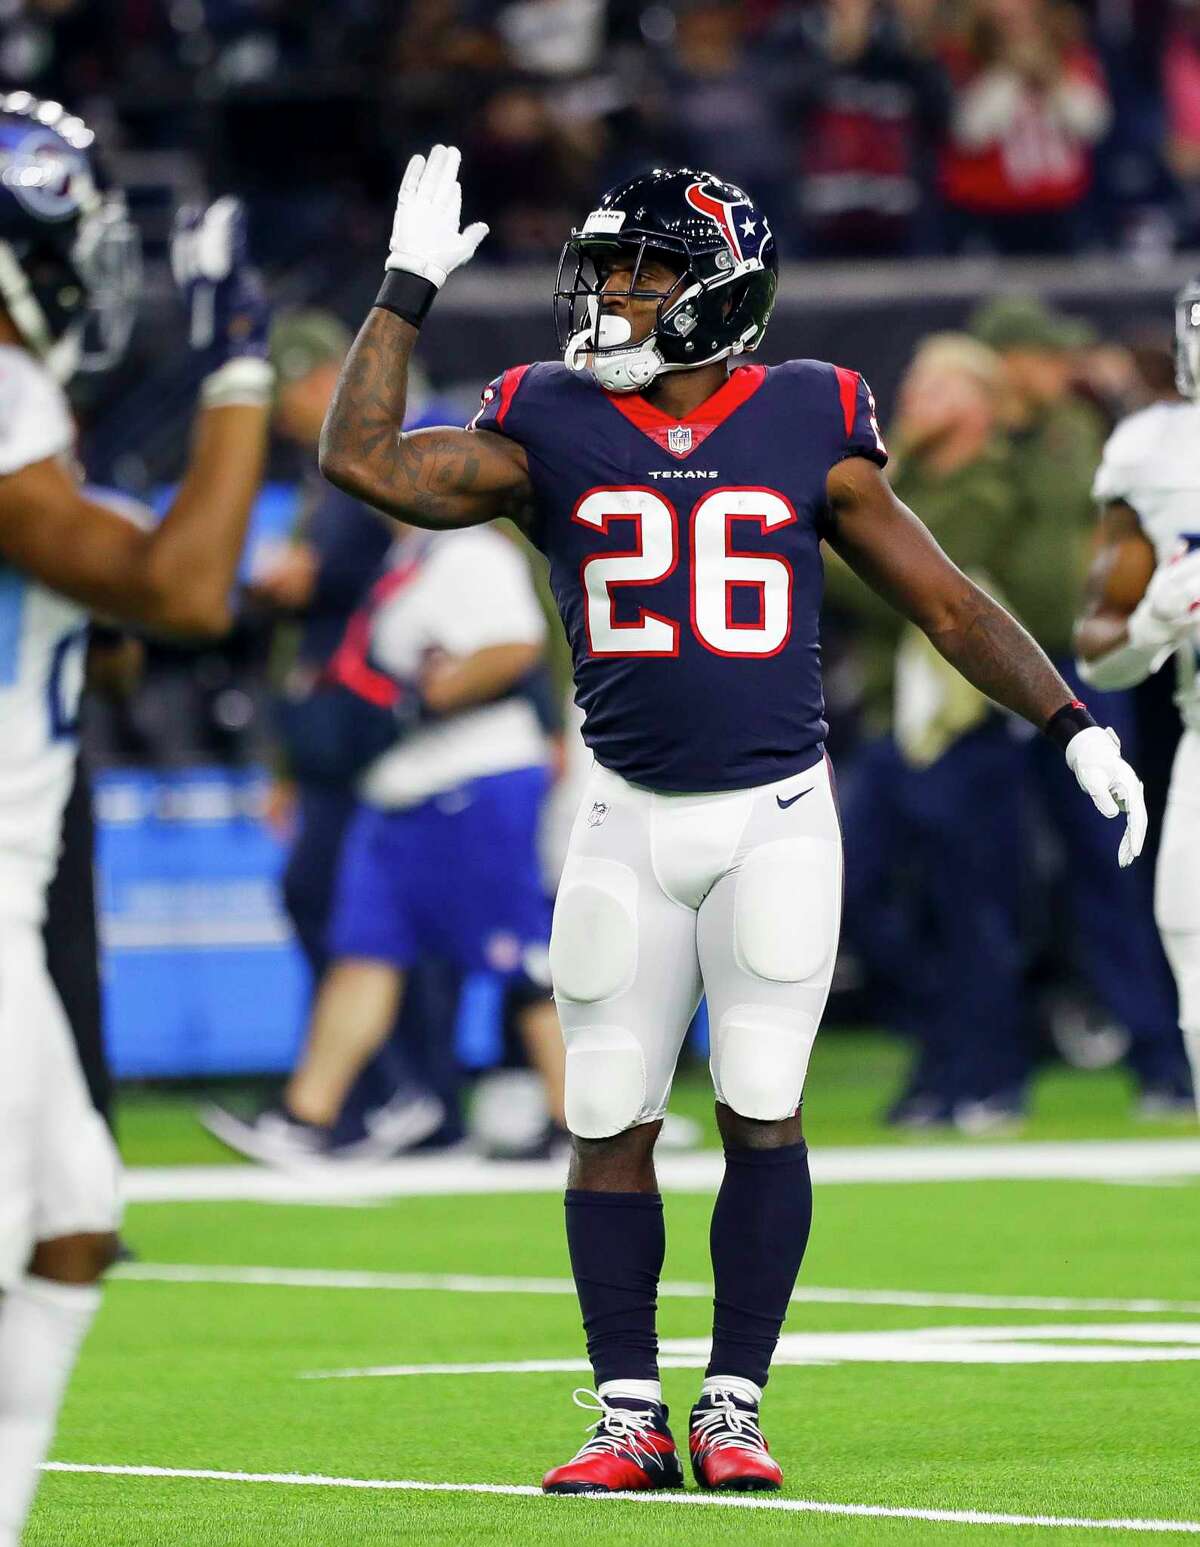 Houston Texans running back Lamar Miller (26) celebrates a first down during the first quarter of an NFL football game at NRG Stadium on Monday, Nov. 26, 2018, in Houston.